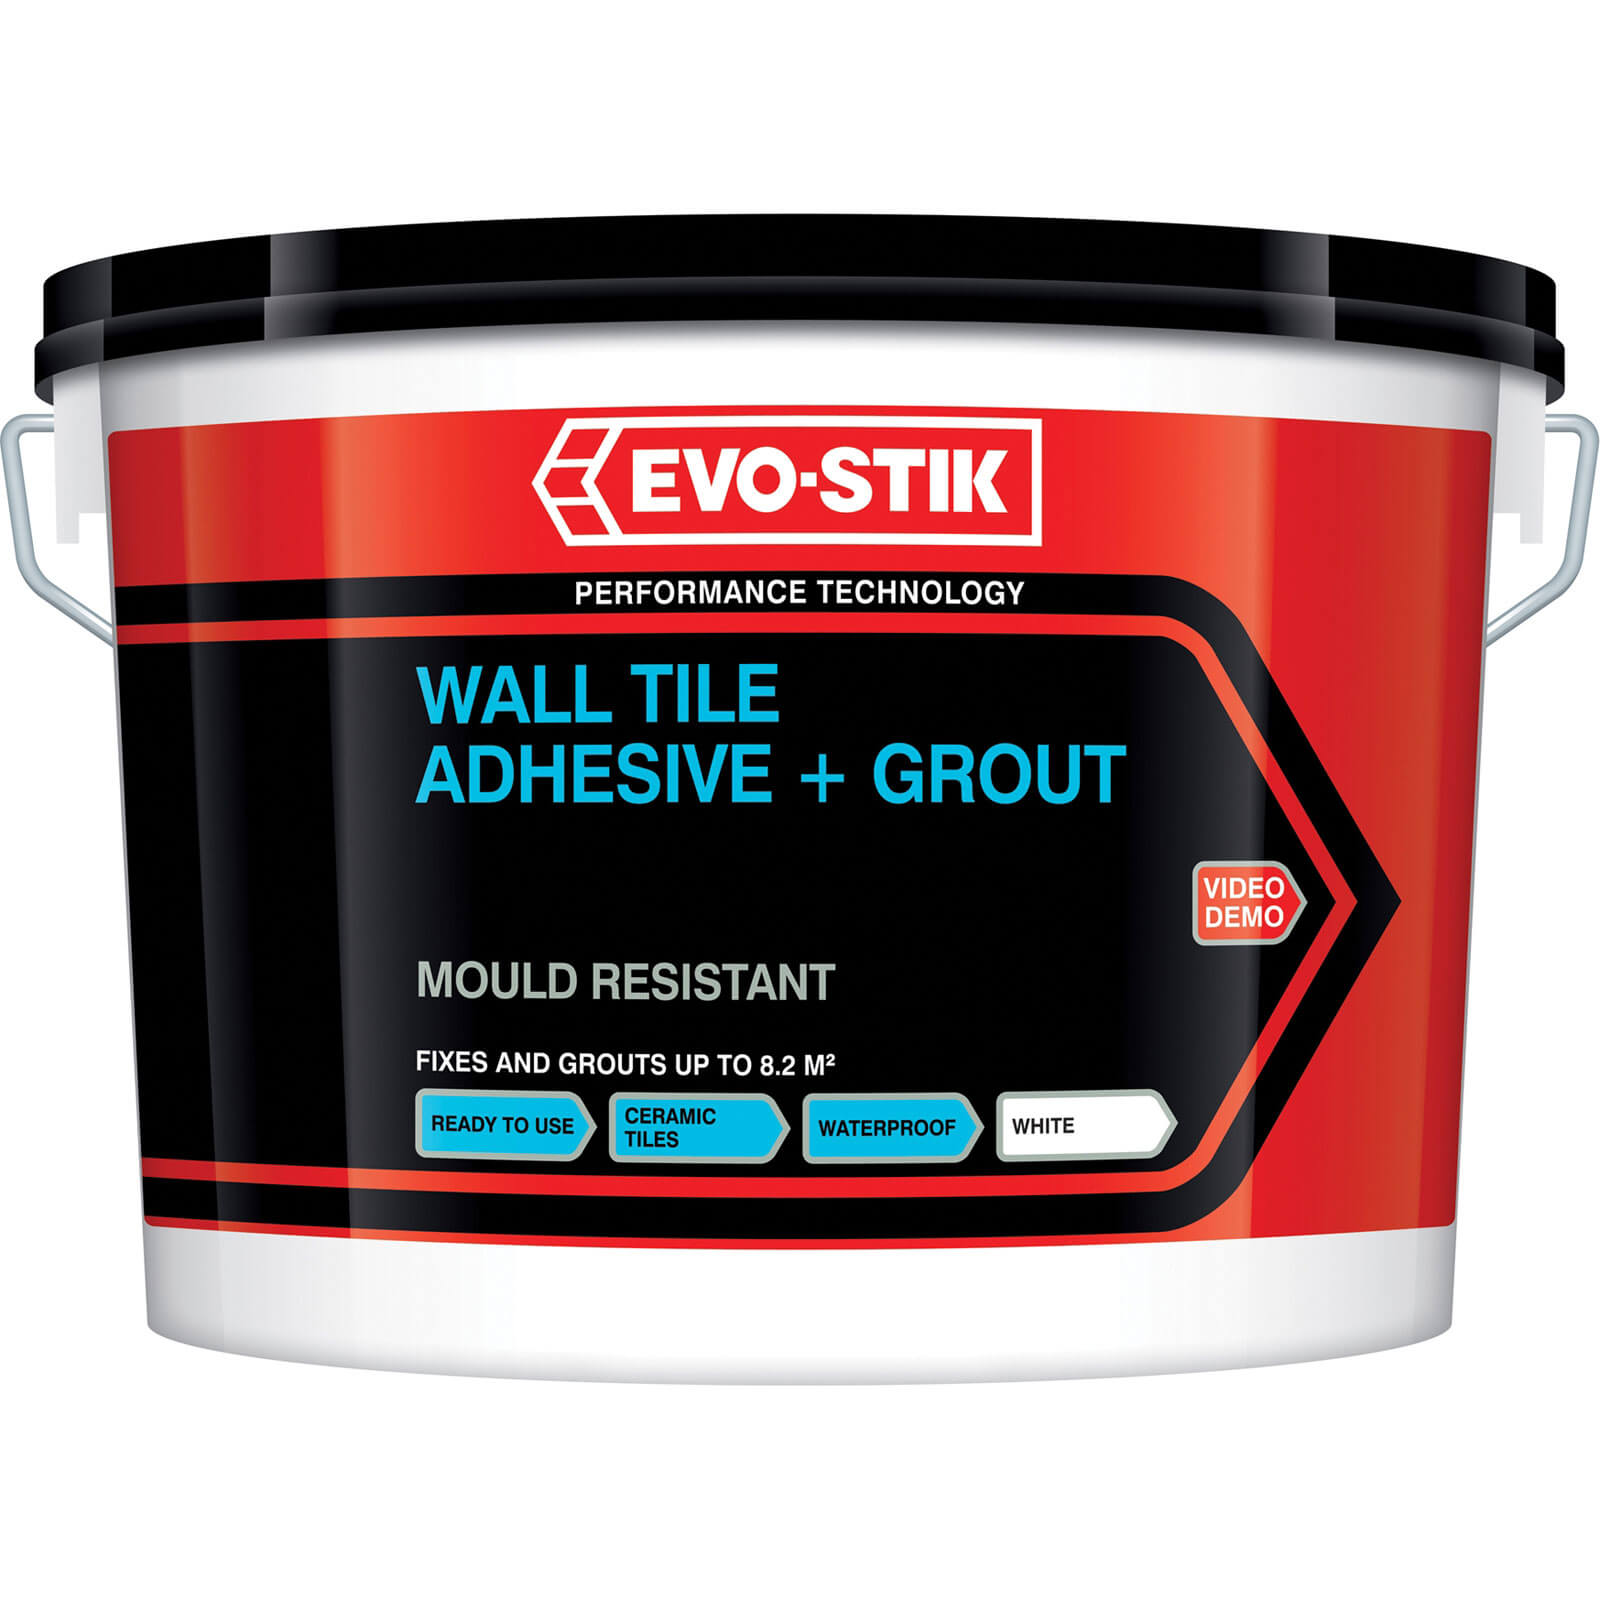 Image of Evo-stik Tile A Wall Tile Adhesive and Grout 2.5l